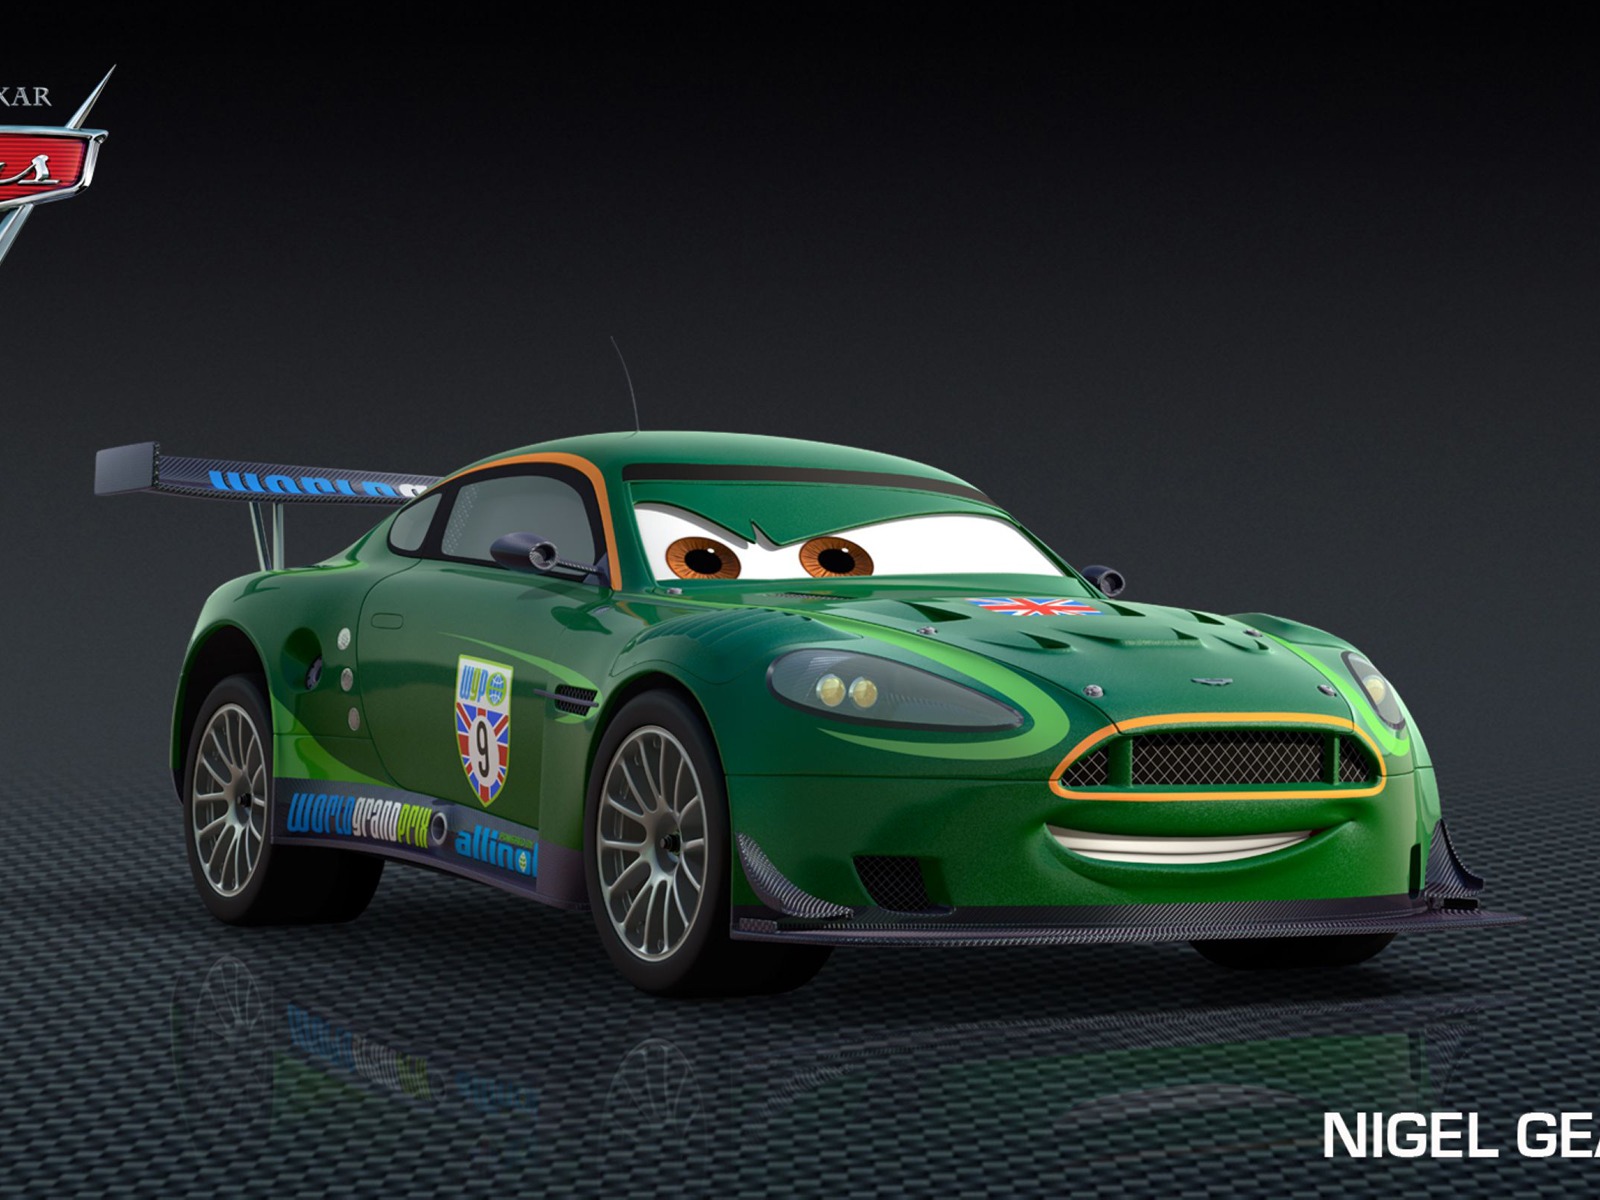 Cars 2 wallpapers #29 - 1600x1200